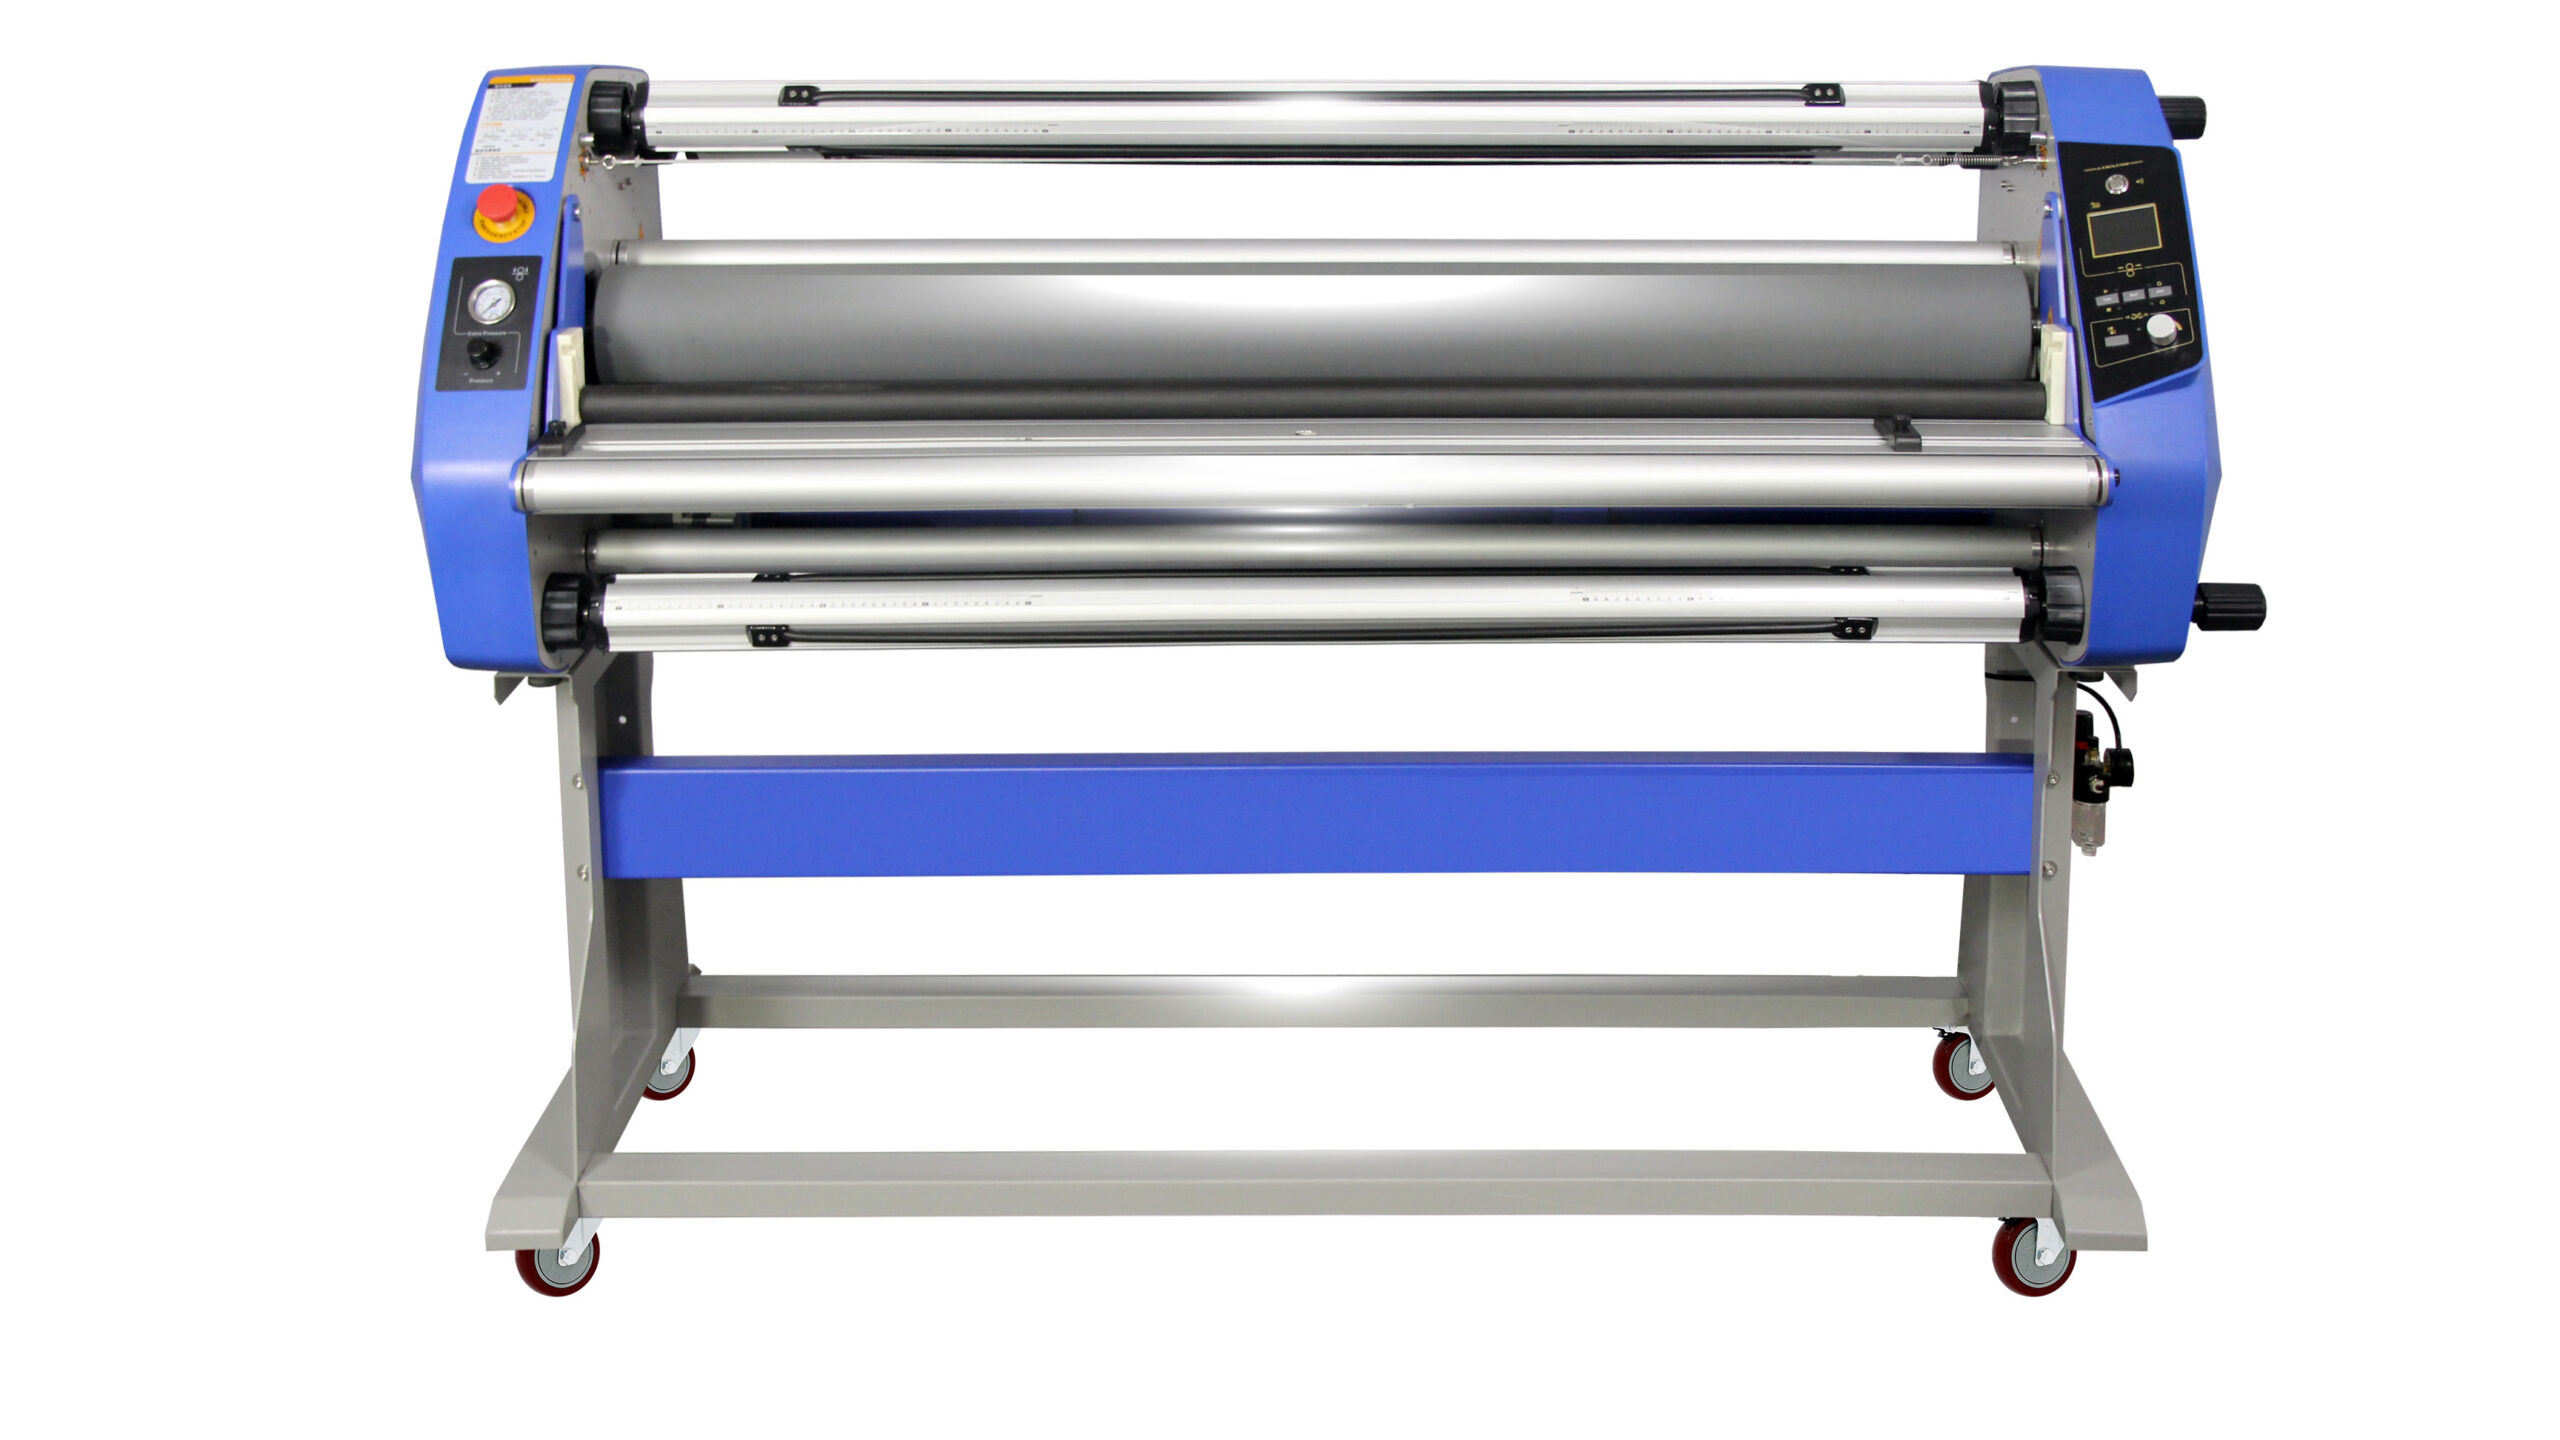 1.3 mm fully auto hot laminator with two guide rollers